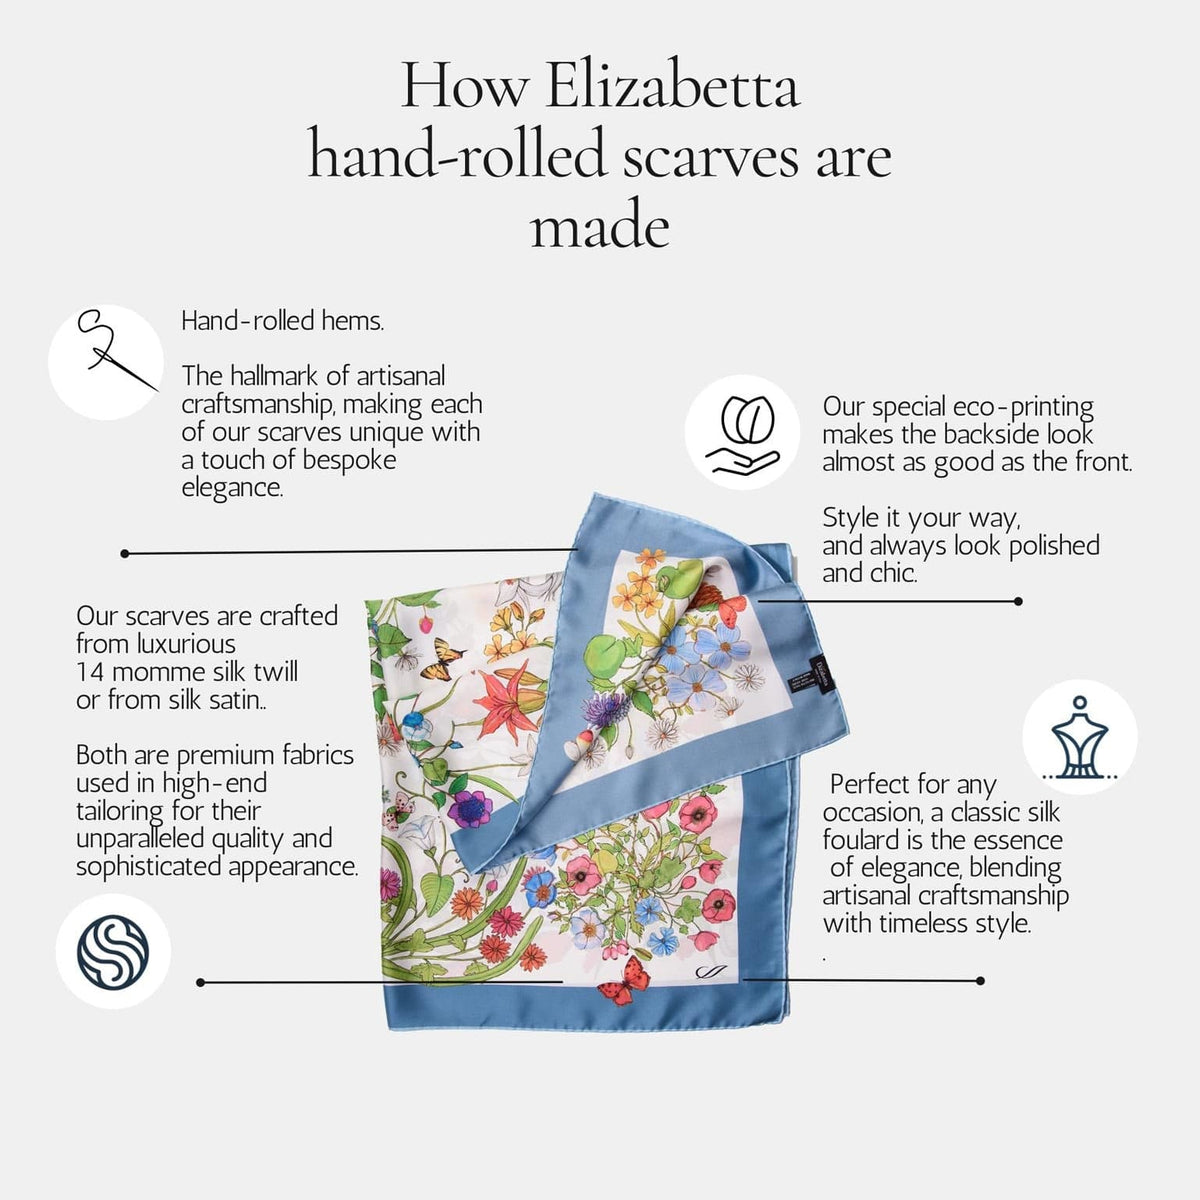 How Elizabetta handrolled scarves are made